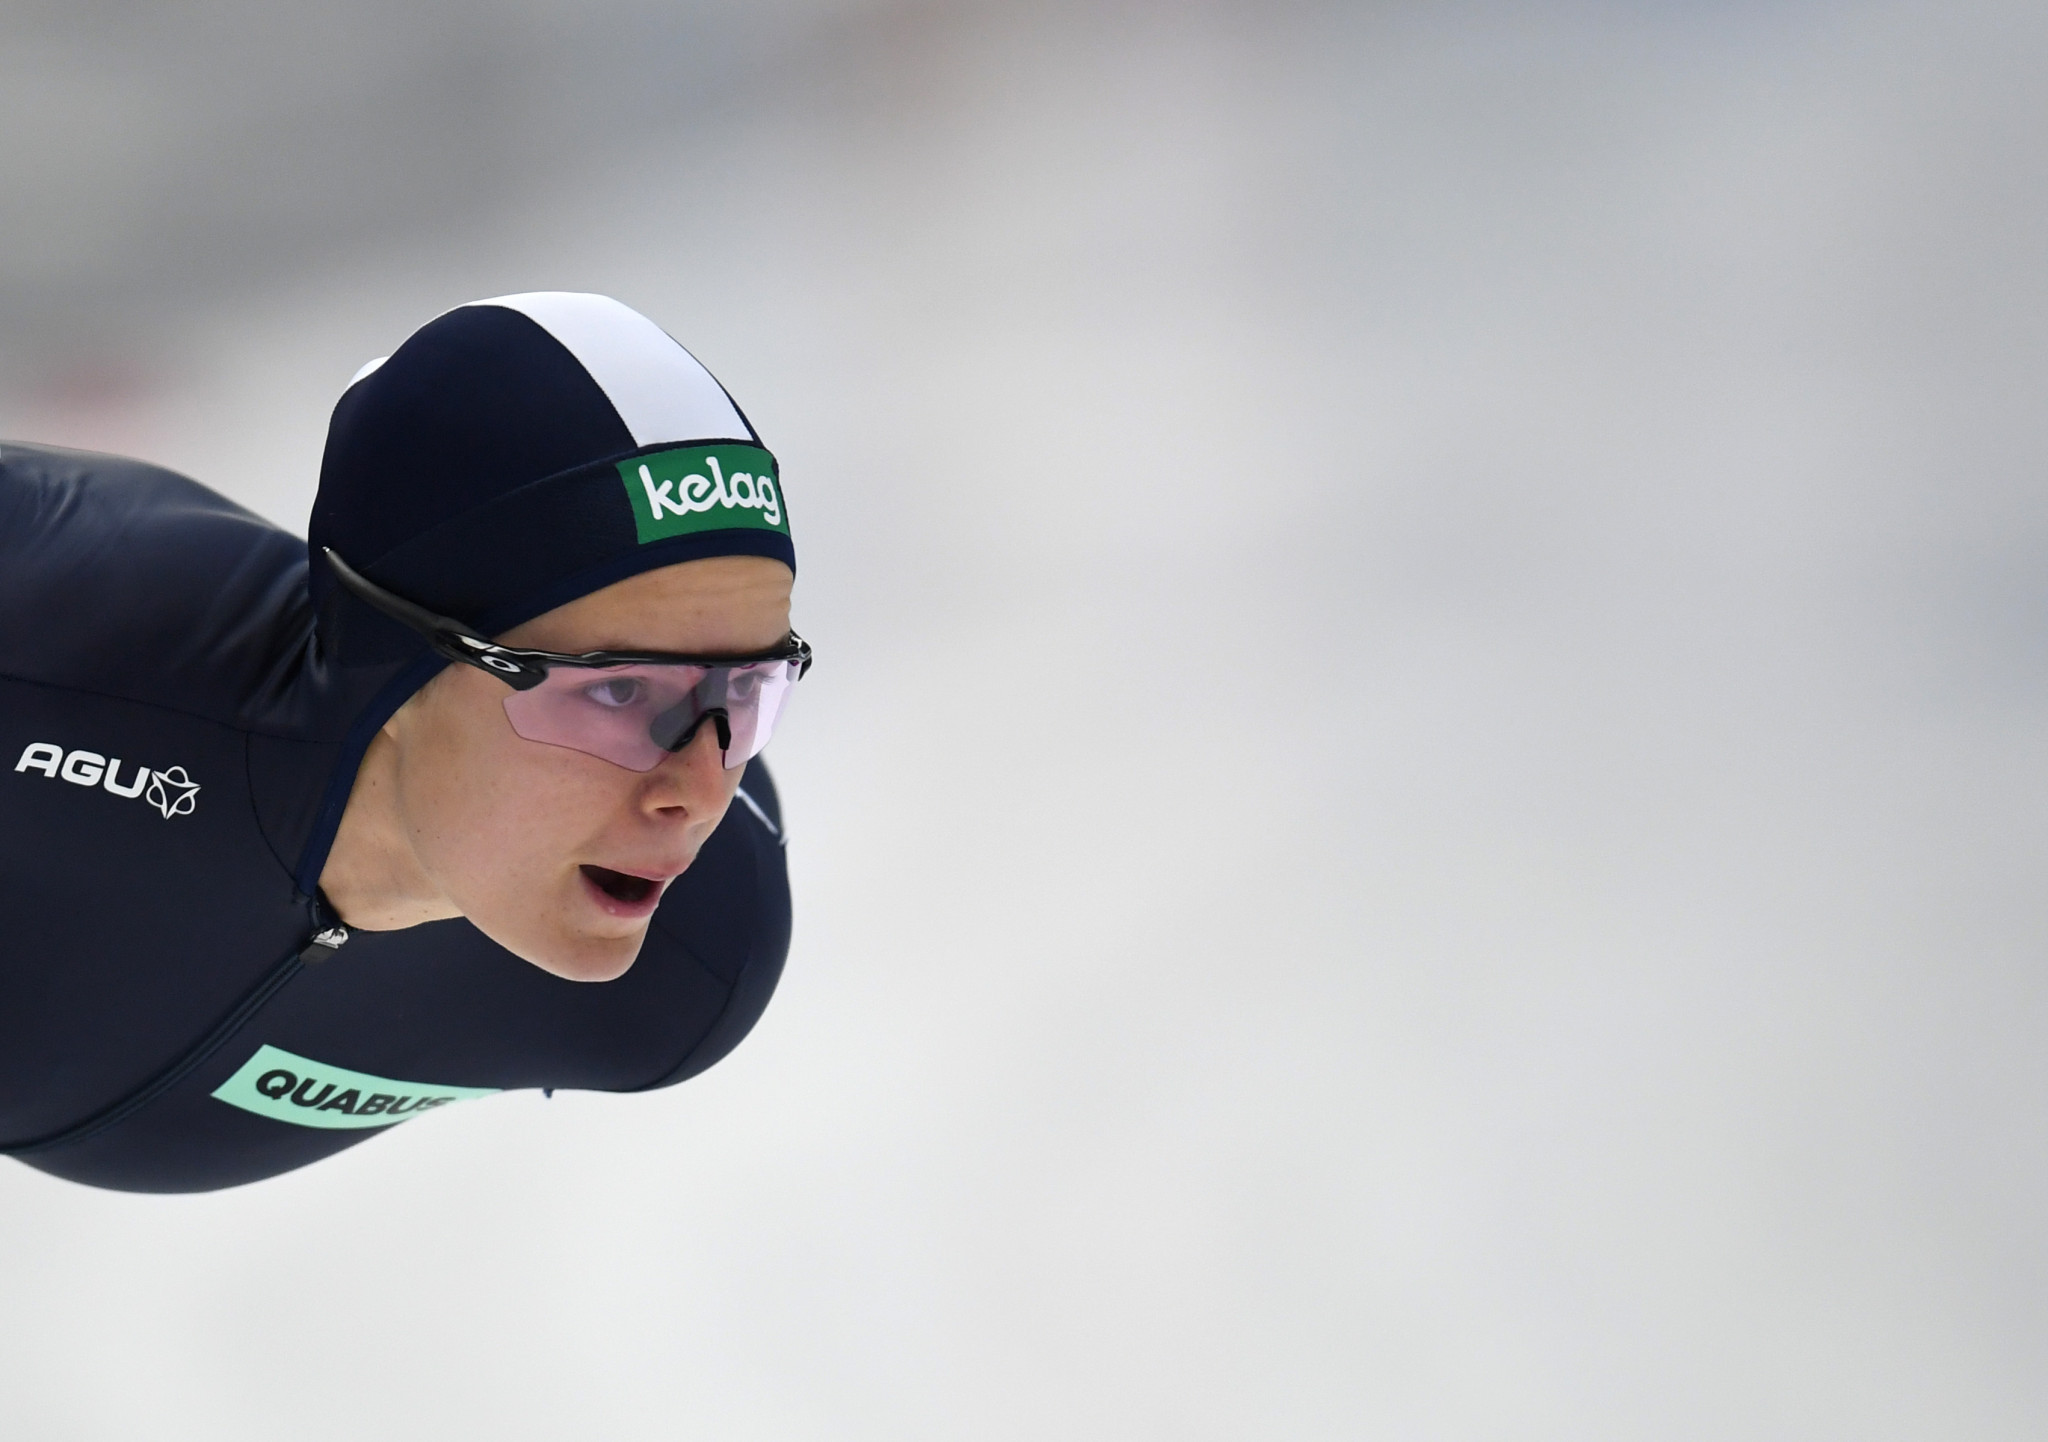 Vanessa Herzog of Austria will aim to retain her 500m title, despite a difficult start to the season ©Getty Images